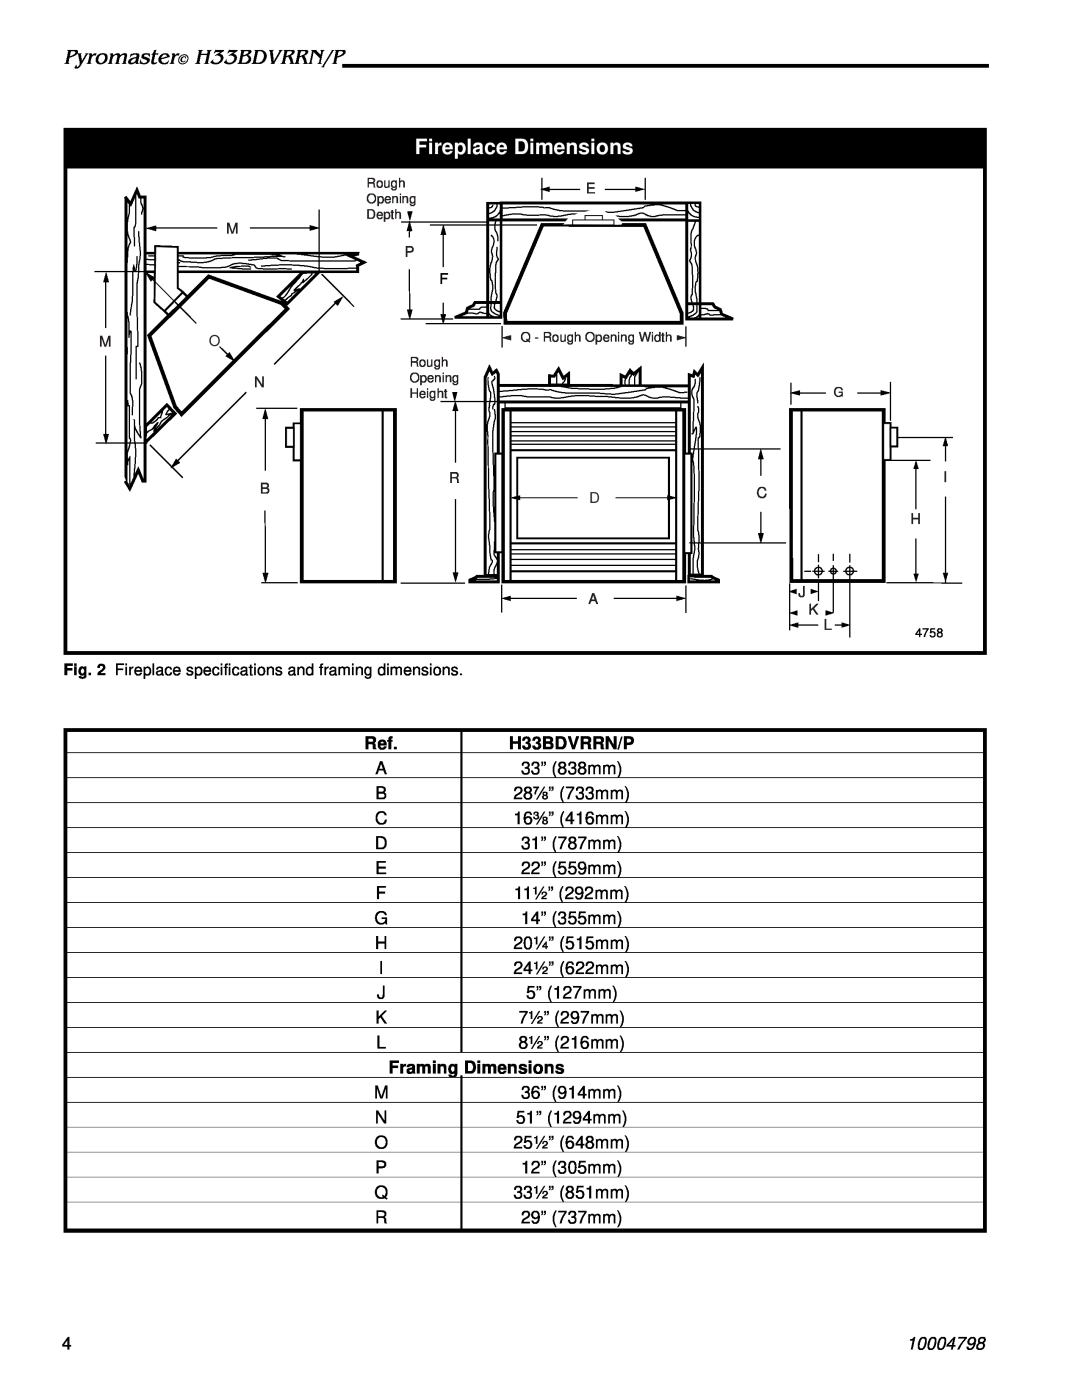 Vermont Casting H33BDVRRNP manual Fireplace Dimensions, Pyromaster H33BDVRRN/P, Framing Dimensions, 10004798 